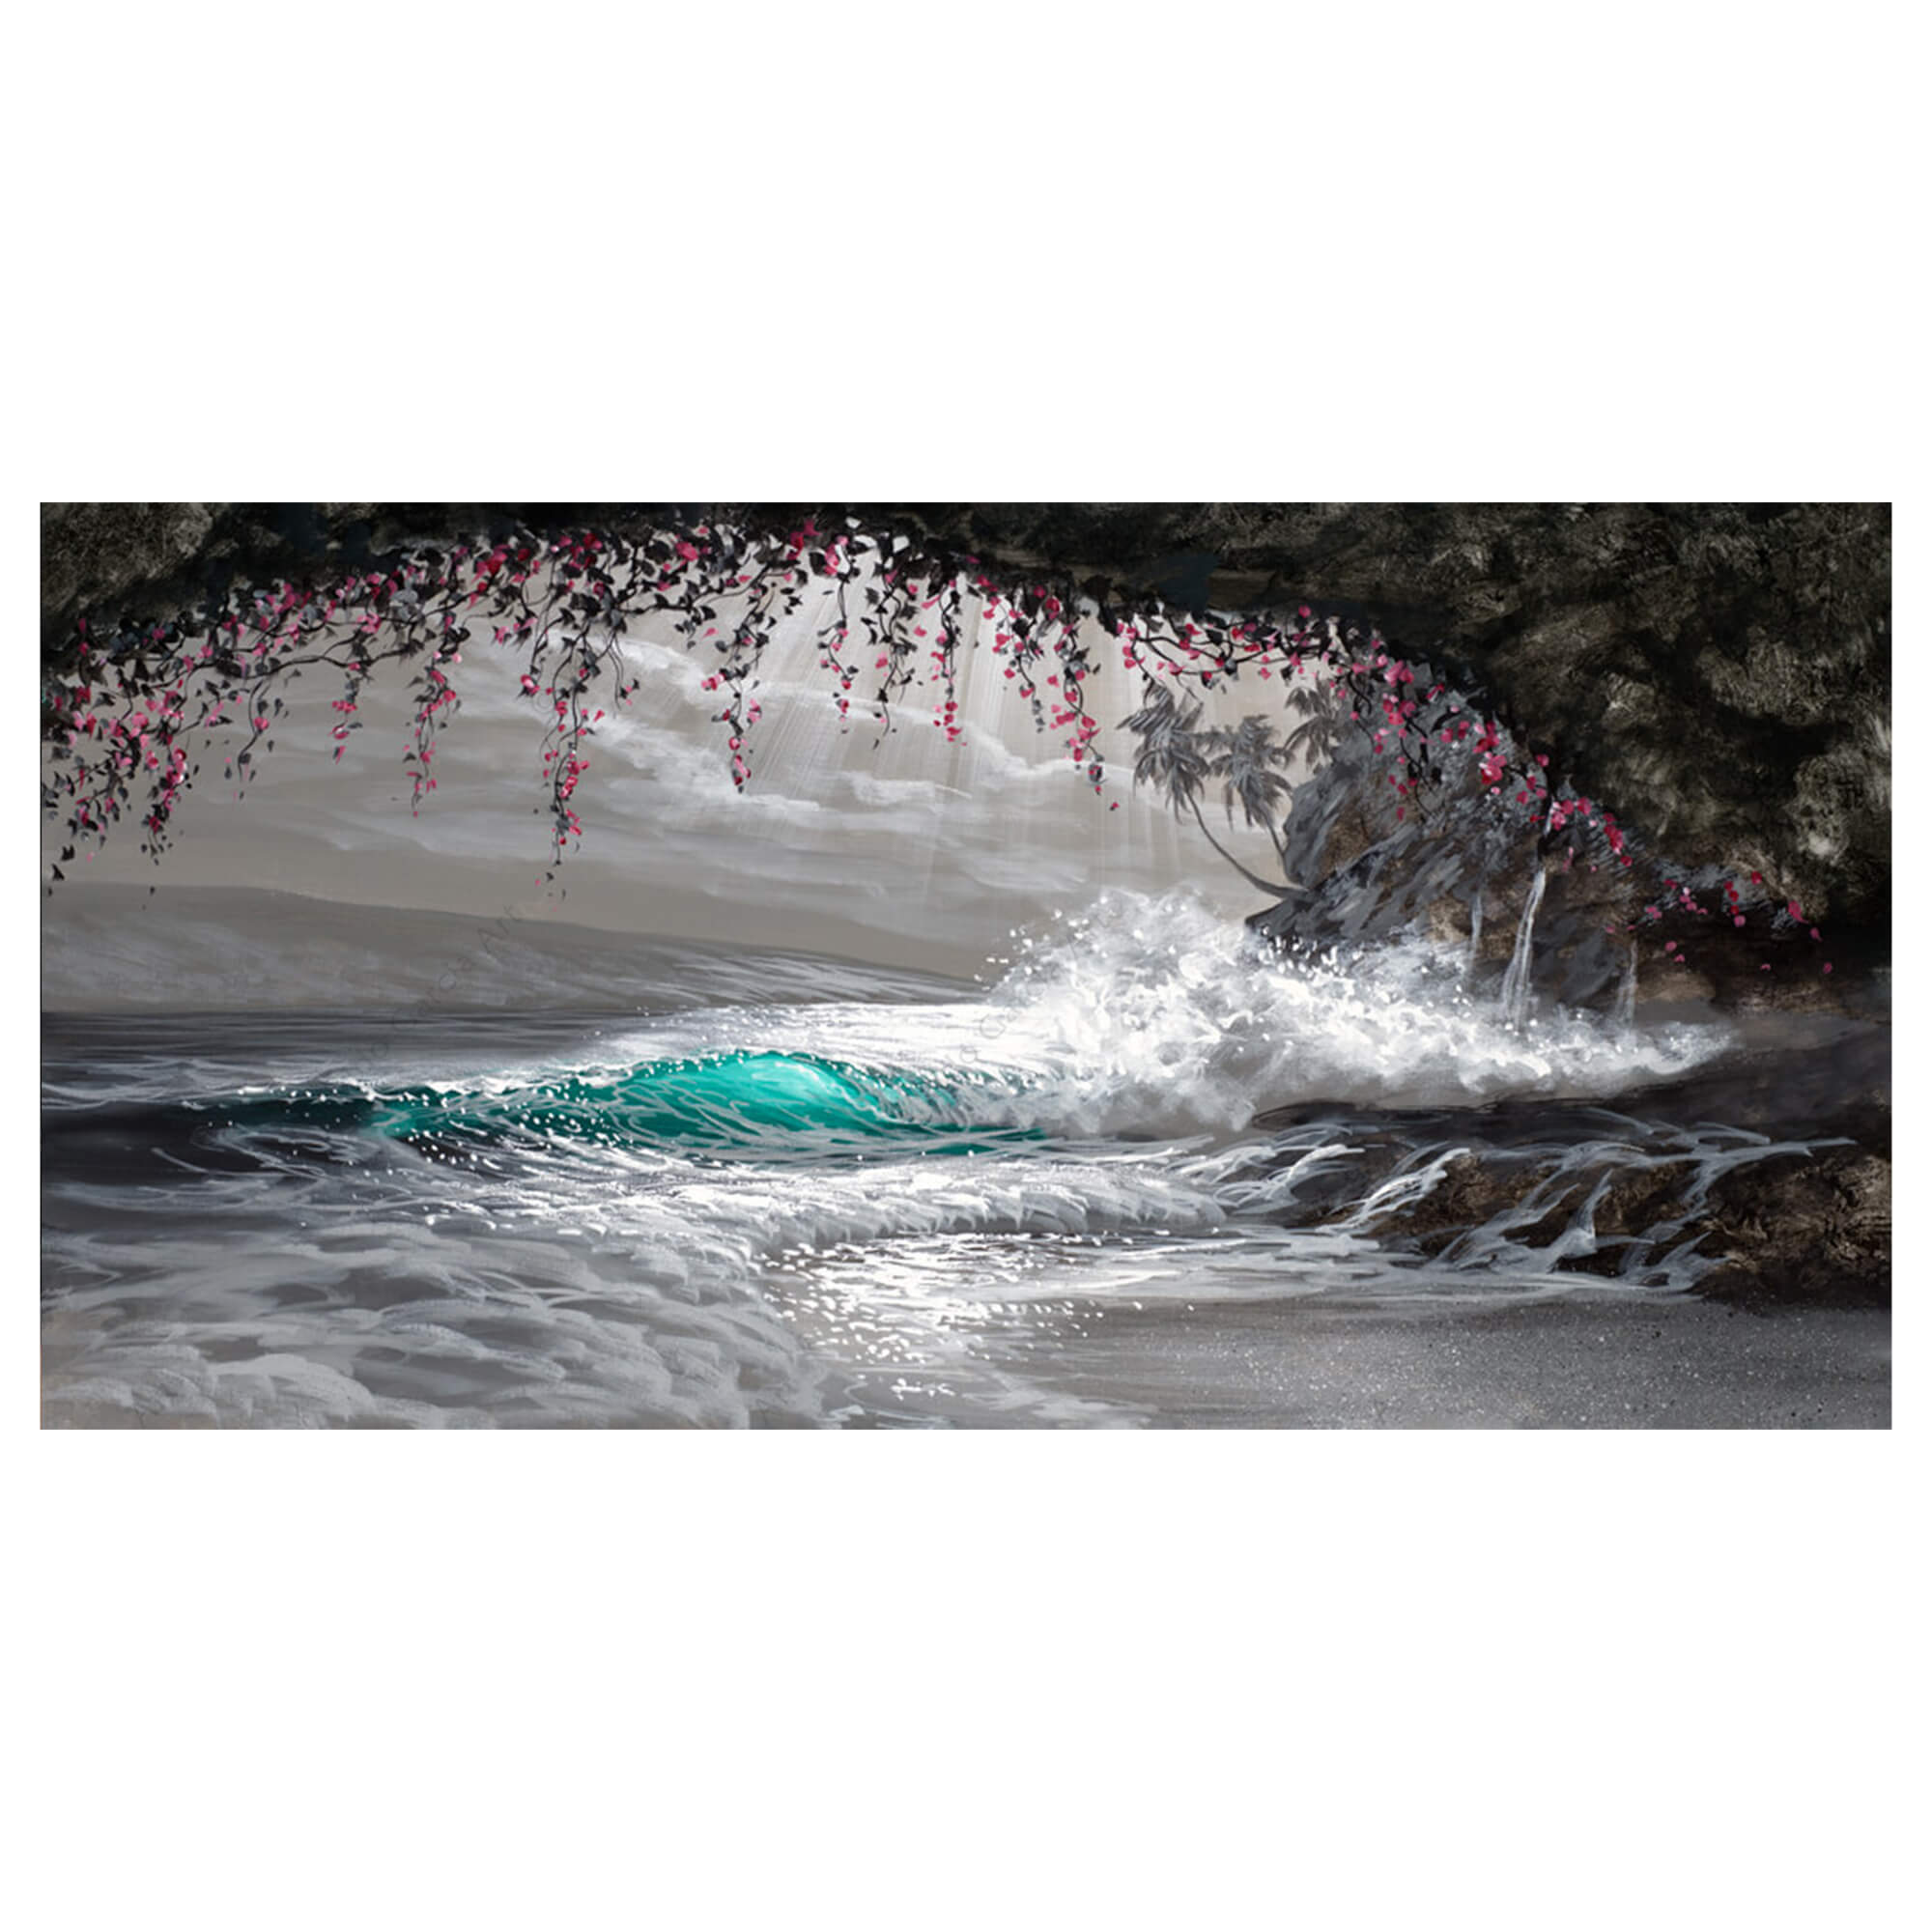 A matted art print of a black and white, with a touch of pink and teal, wave as seen from a cove by Hawaii artist Walfrido Garcia